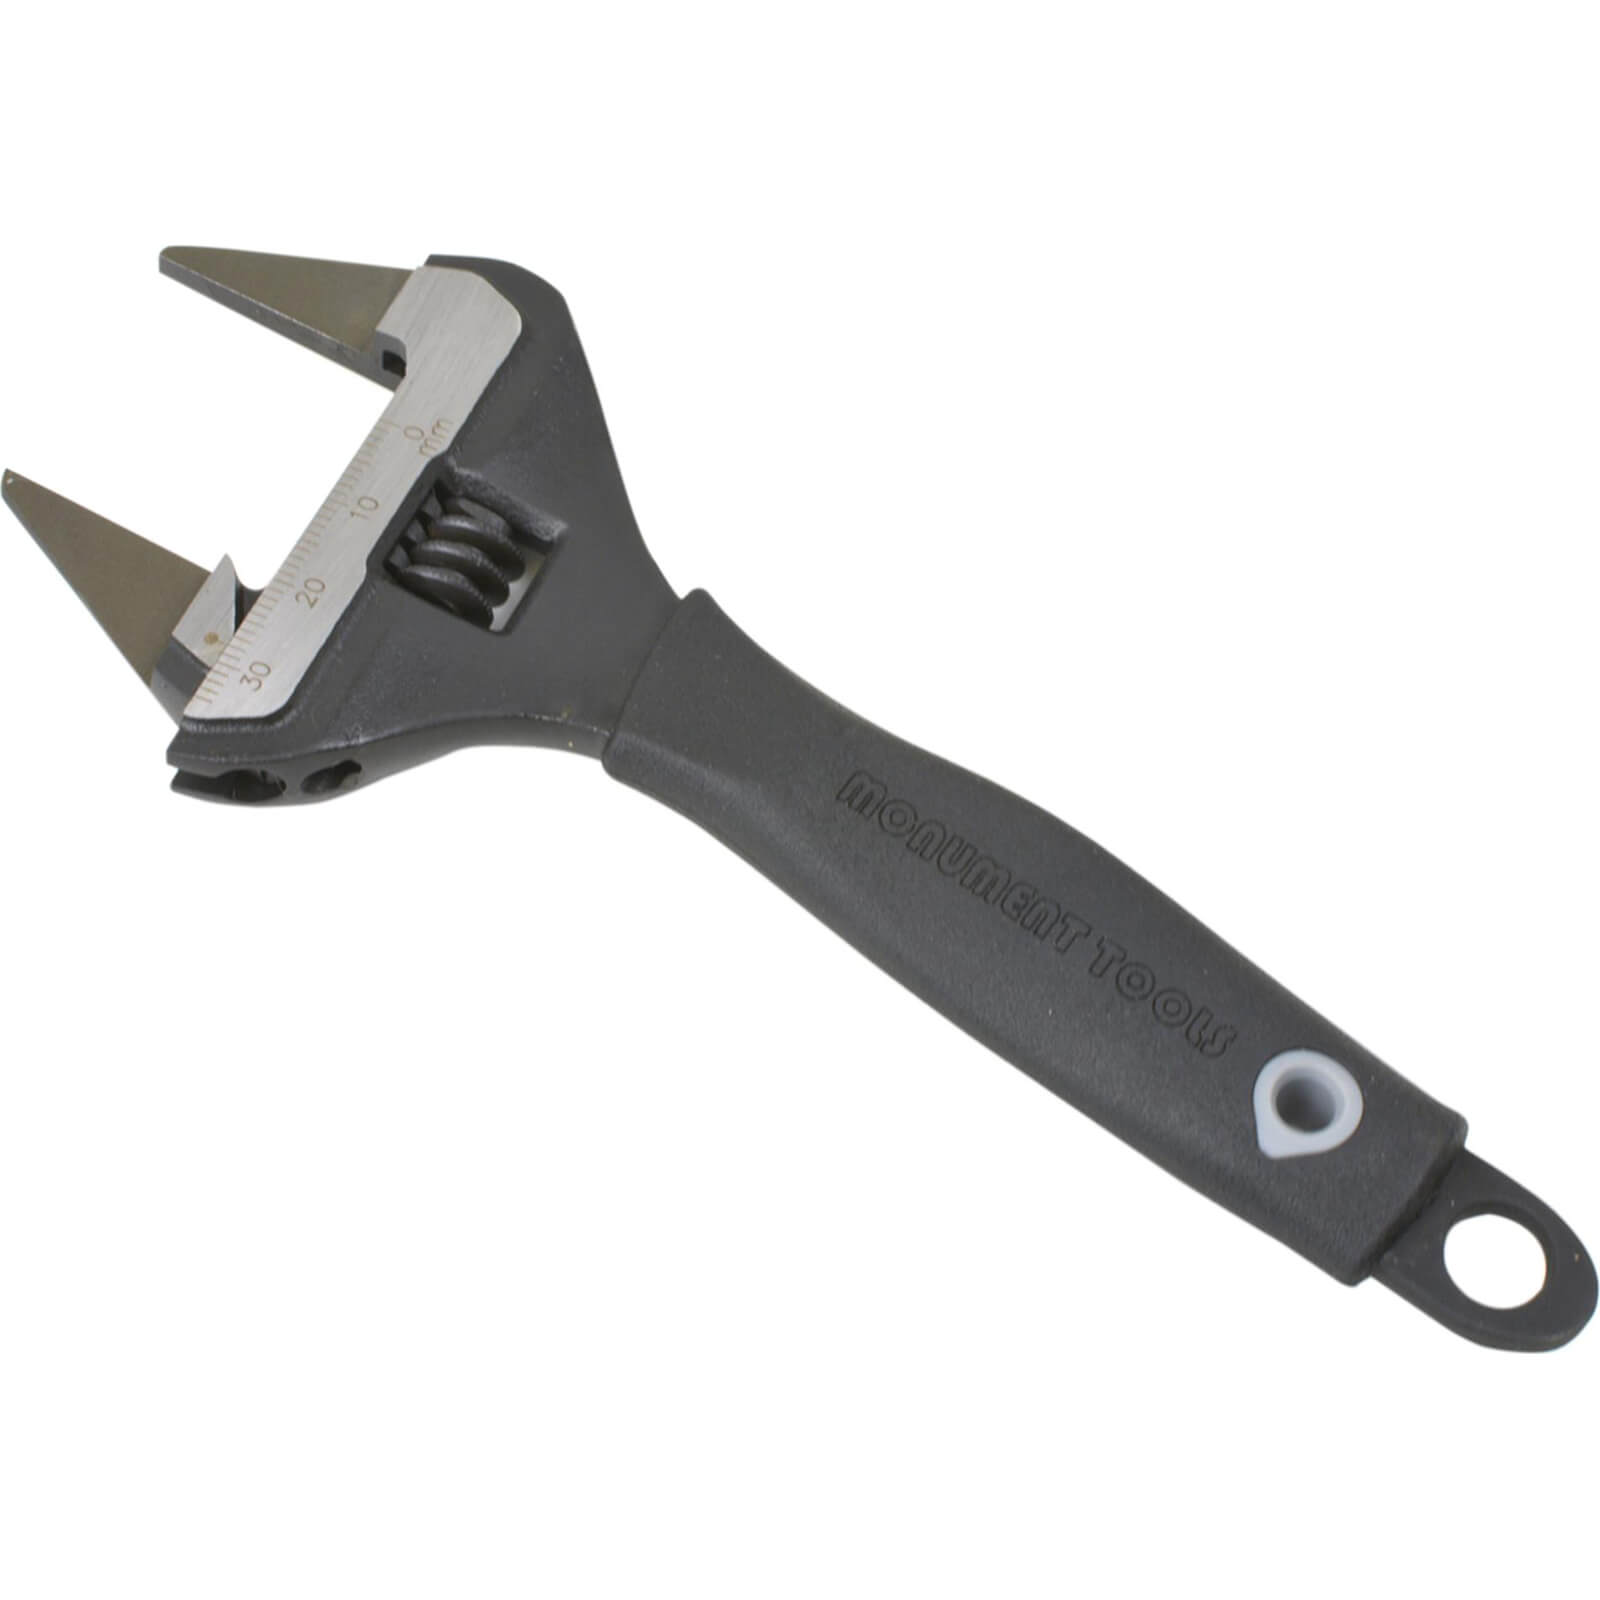 Photos - Wrench Monument Thin Jaw Adjustable Spanner 150mm 4140S 